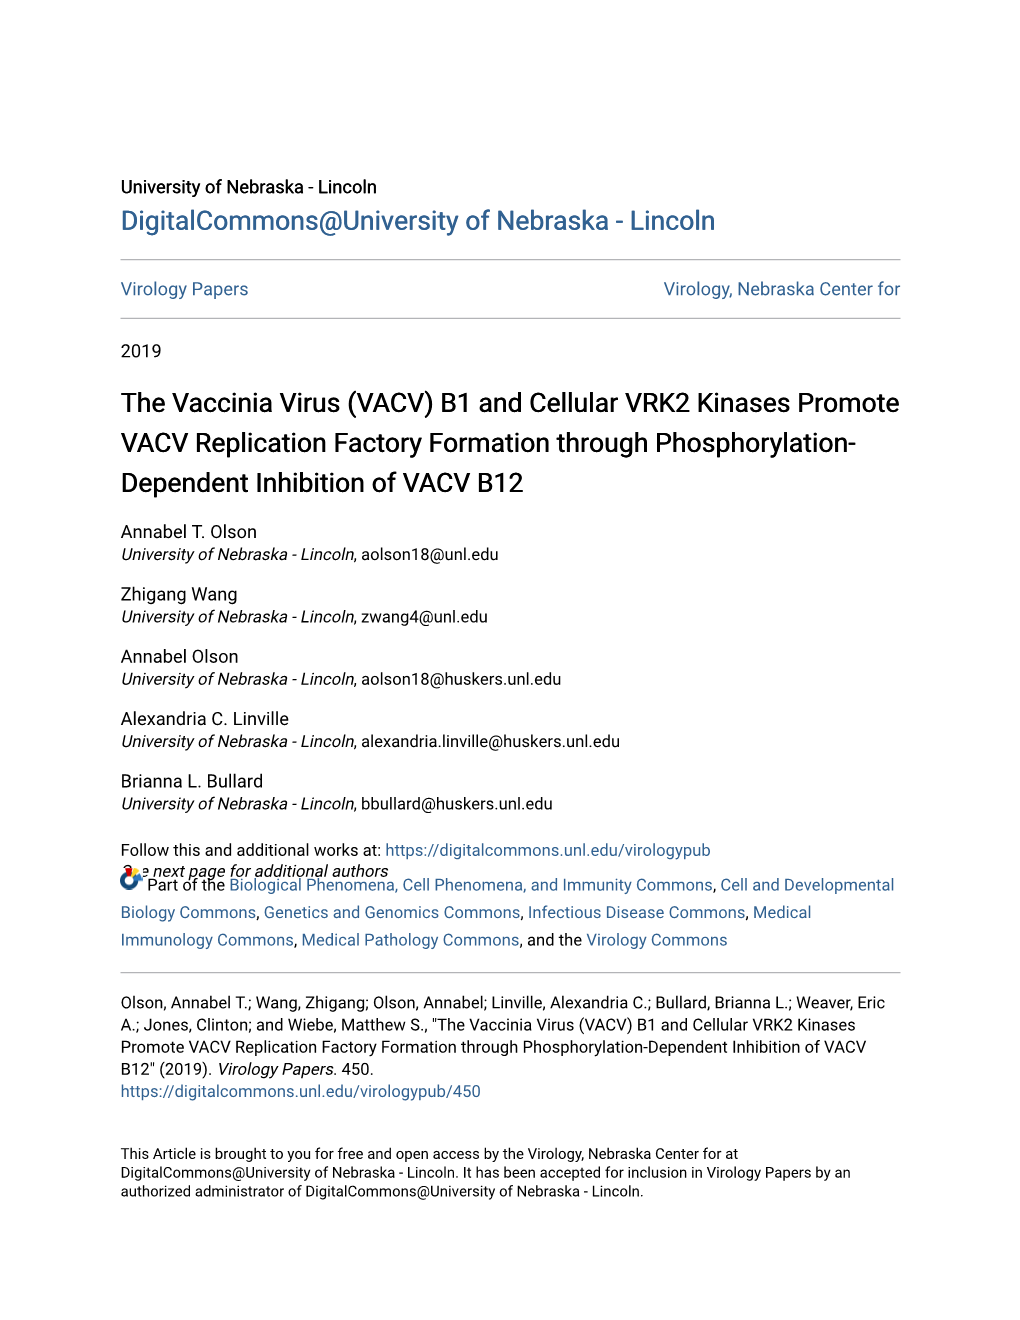 The Vaccinia Virus (VACV) B1 and Cellular VRK2 Kinases Promote VACV Replication Factory Formation Through Phosphorylation-Dependent Inhibition of VACV B12" (2019)